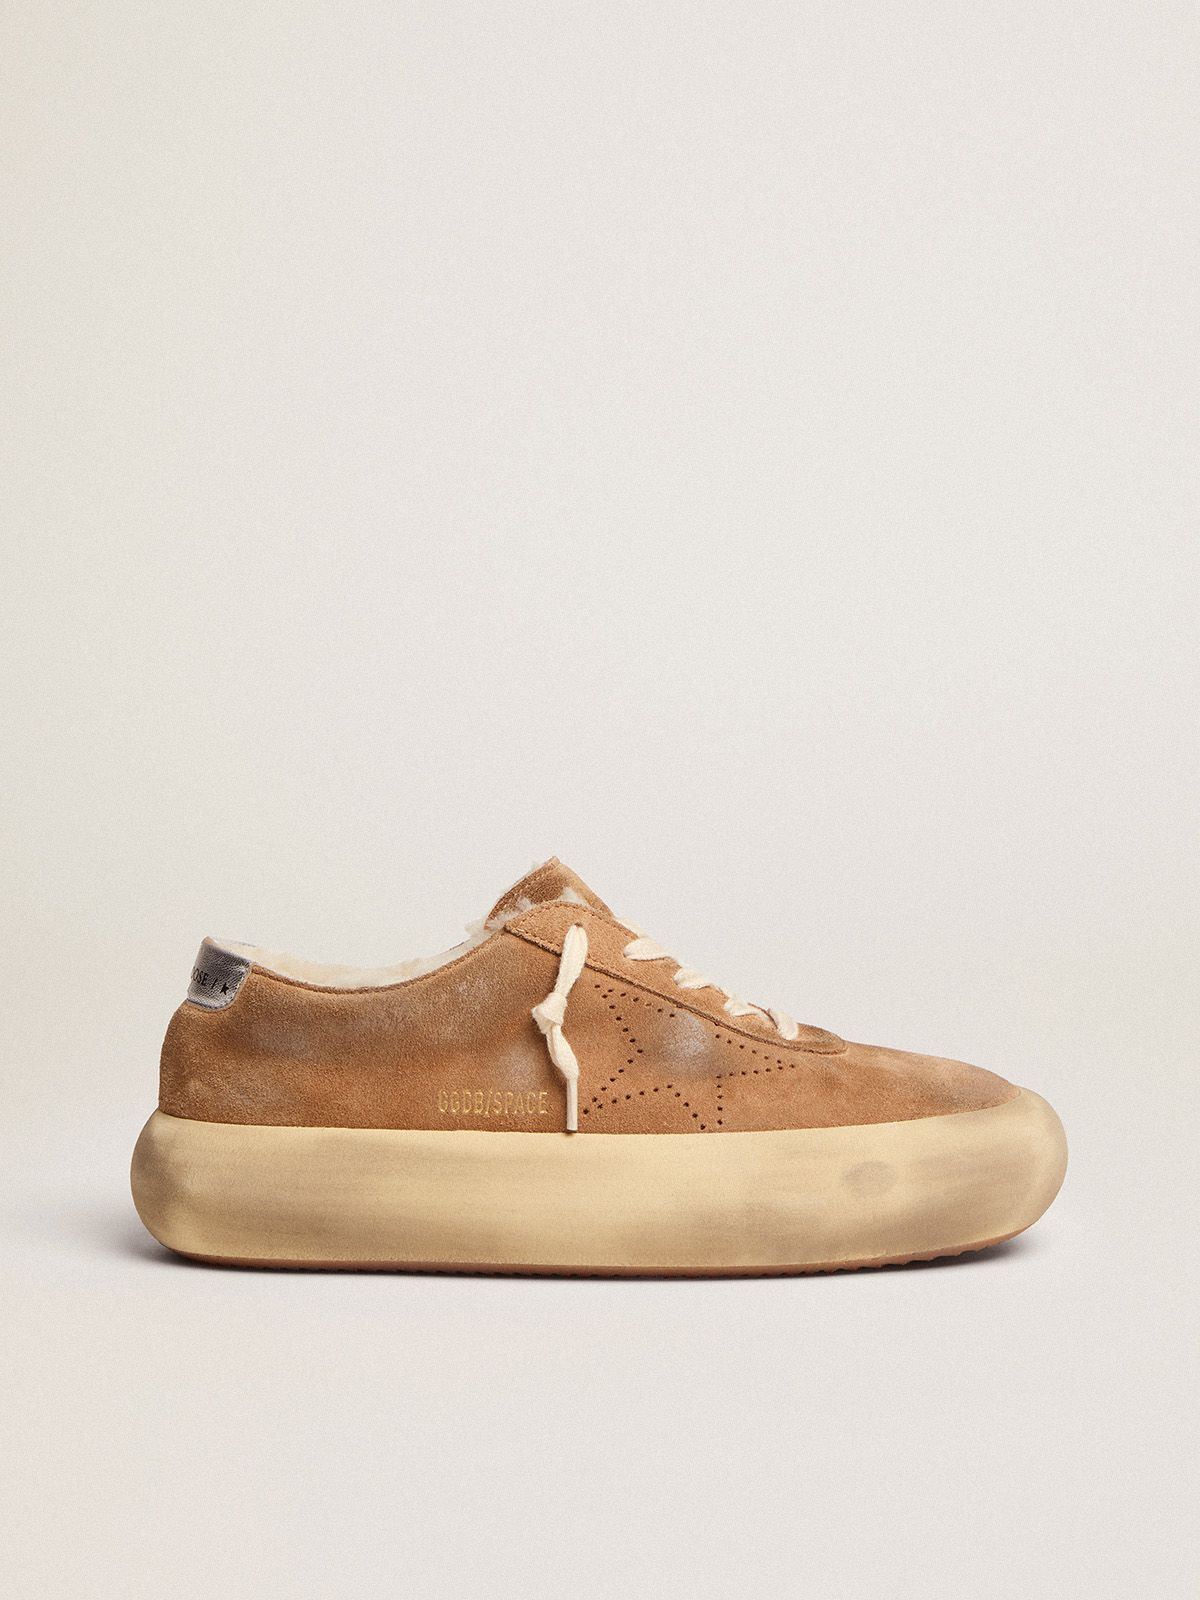 golden goose in tobacco-colored Space-Star lining suede with shearling shoes